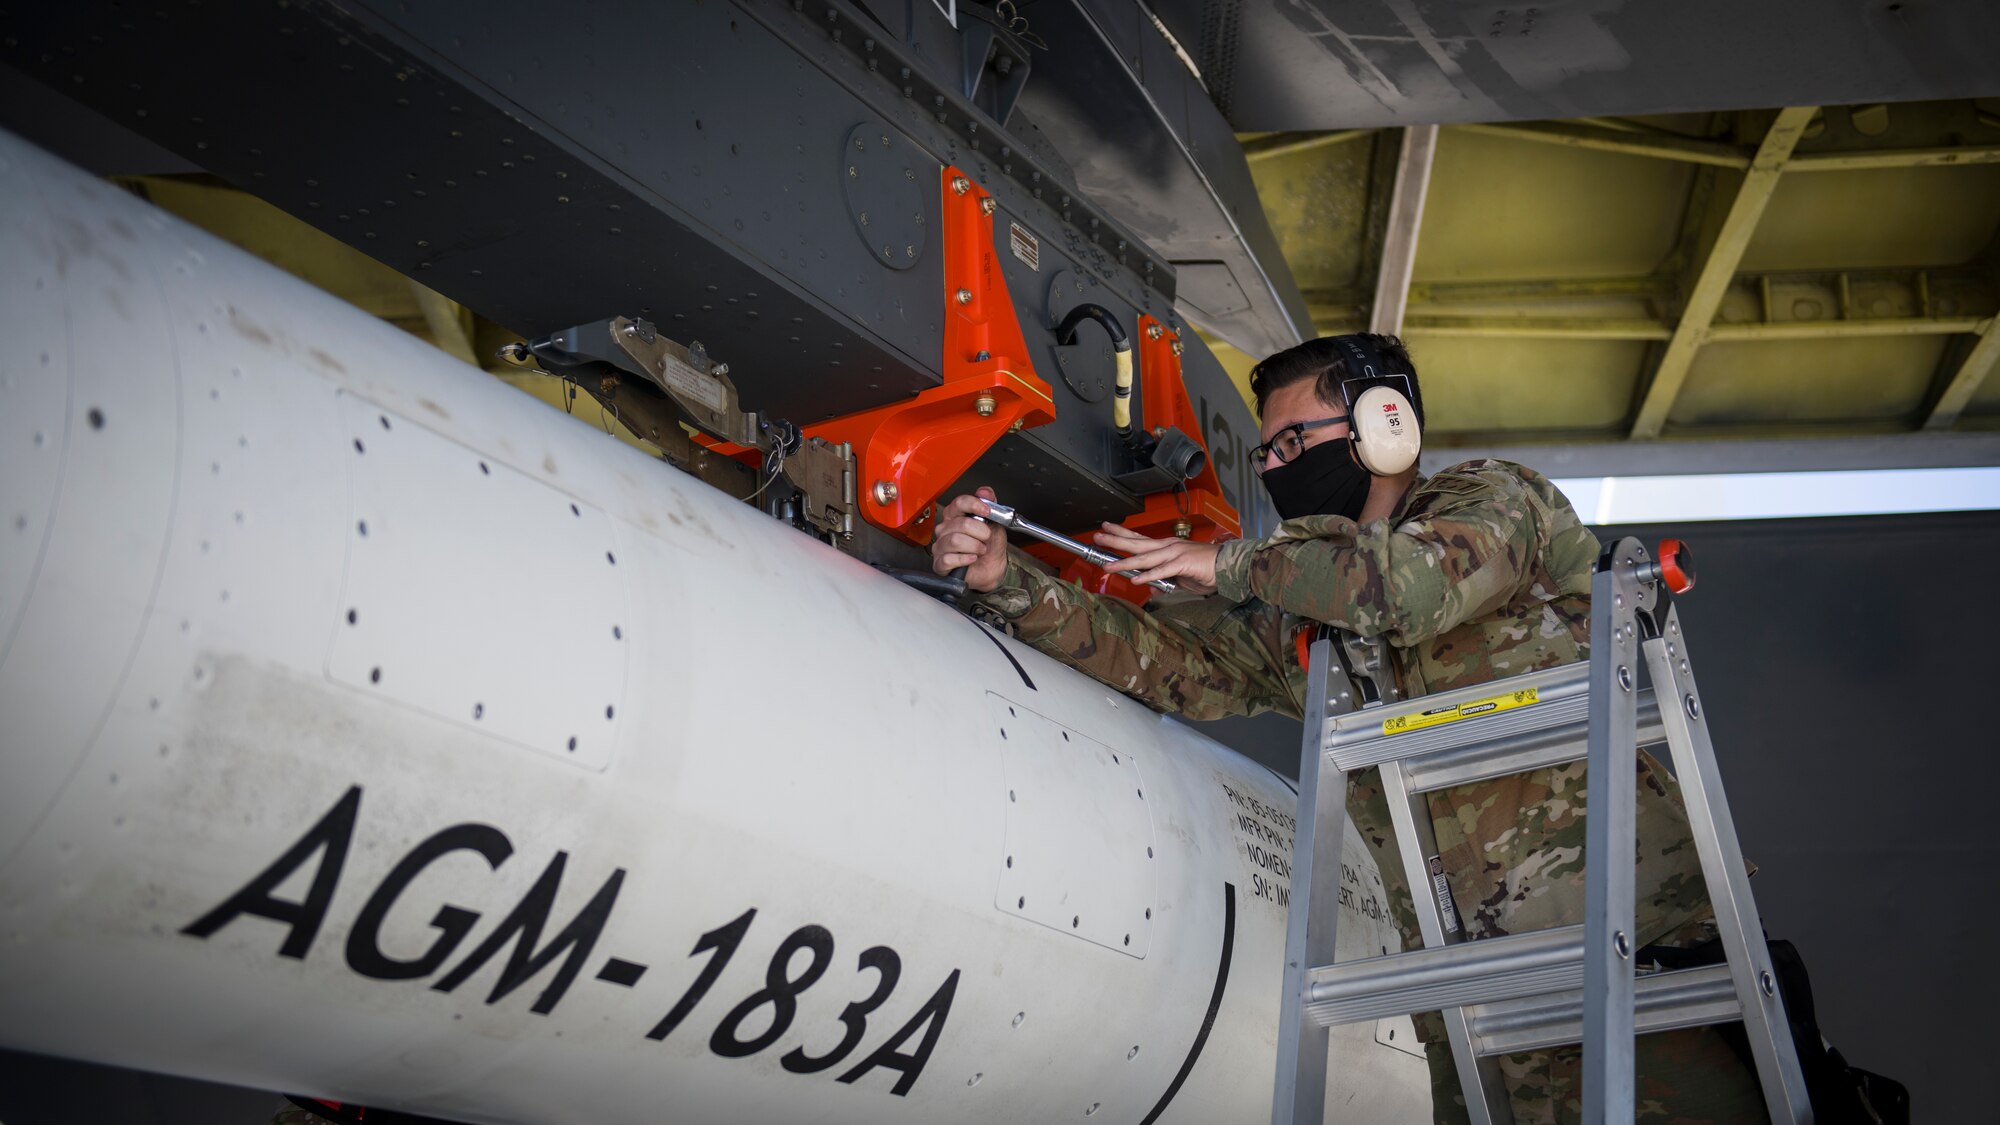 Staff Sgt. Jacob Puente, 912th Aircraft Maintenance Squadron, secures the AGM-183A Air-launched Rapid Response Weapon Instrumented Measurement Vehicle 1 as it is loaded under the wing of a B-52H Stratofortress at Edwards Air Force Base, California, Aug. 6. The ARRW IMV-2 successfully completed a captive carry test off the Southern California coast, Aug. 8. (Air Force photo by Giancarlo Casem)